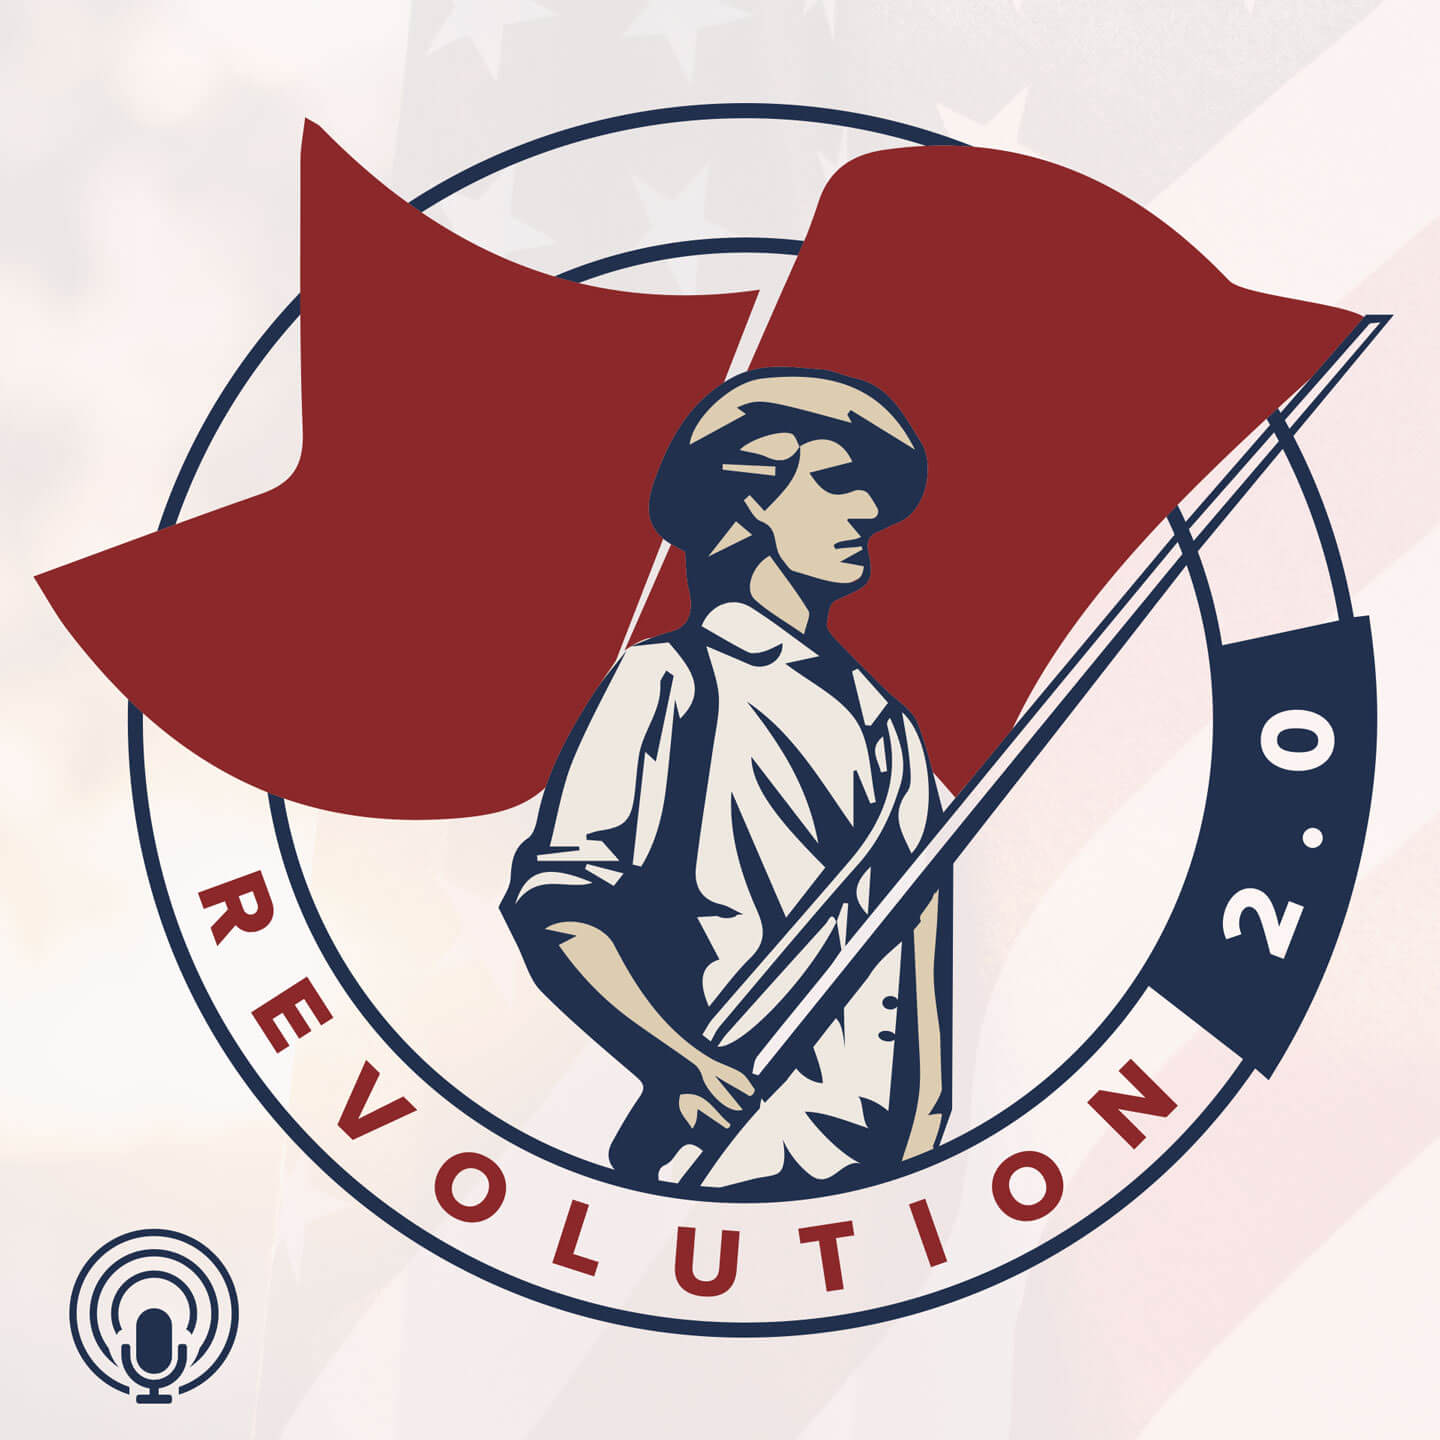 Revolution 2.0™? You Must Be Conservative! (EP.315)